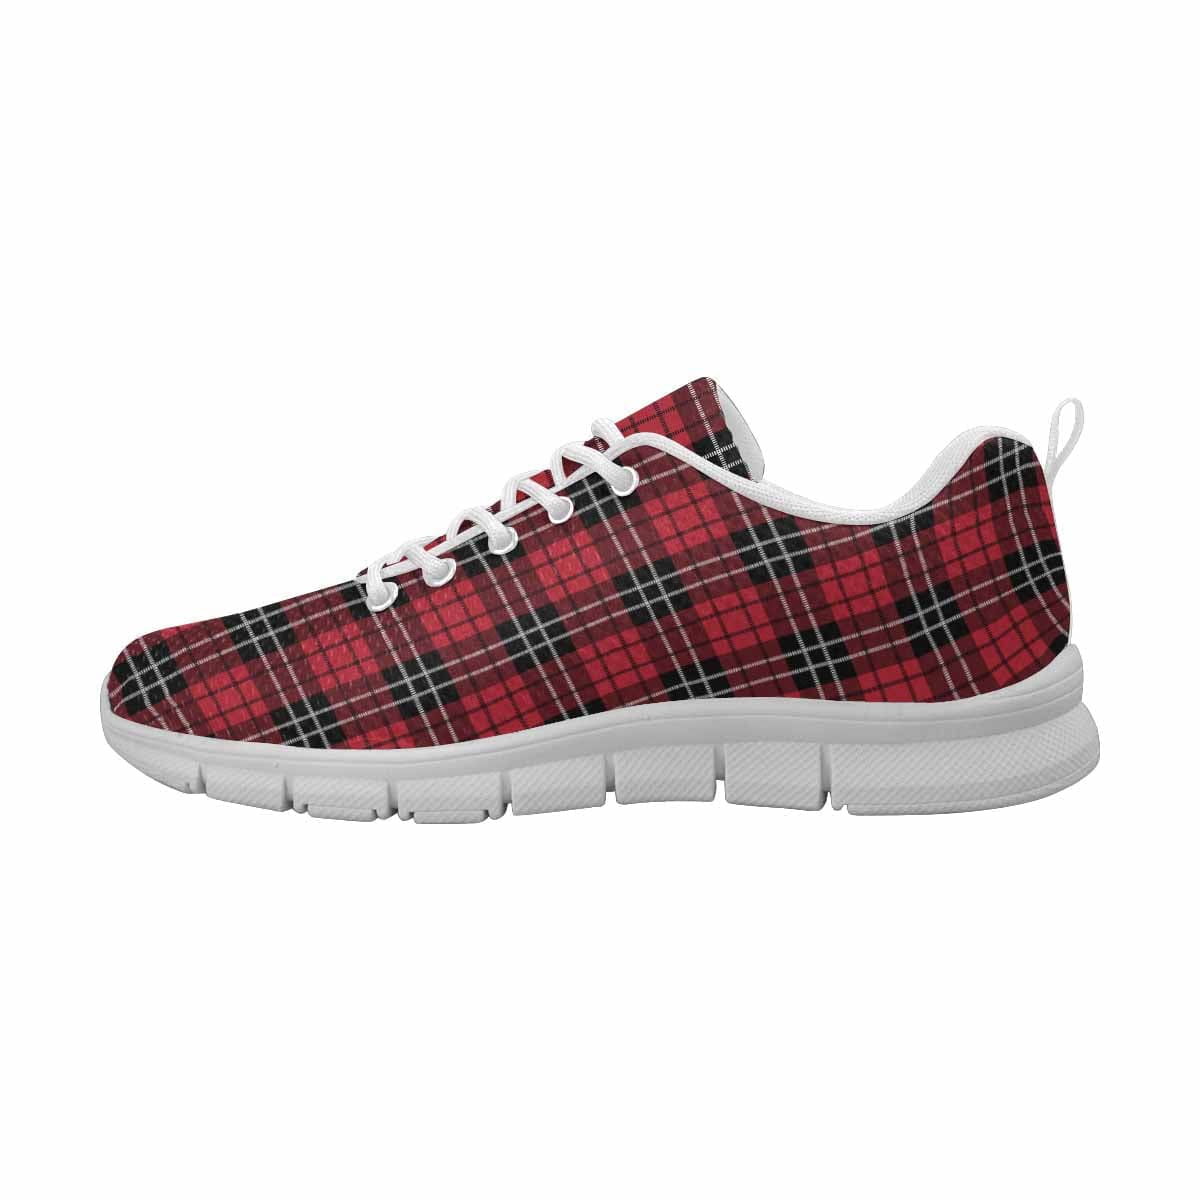 Sneakers For Men Buffalo Plaid Red And Black - Running Shoes Dg851 - Mens